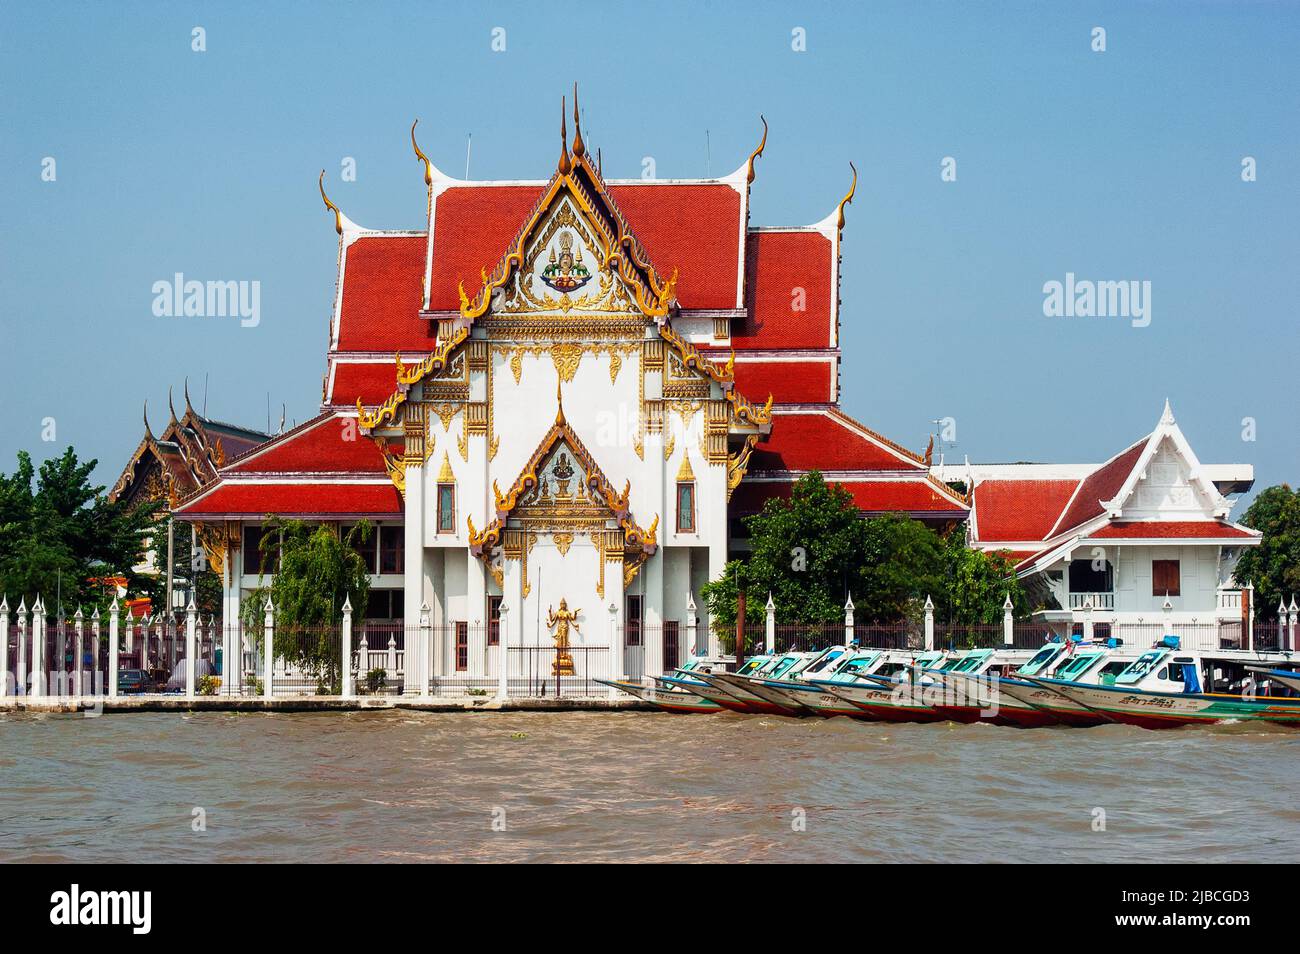 Wat Rakhang, the bell temple by the Chao Phraya River, Bangkok, Thailand with a line of boats moored Stock Photo